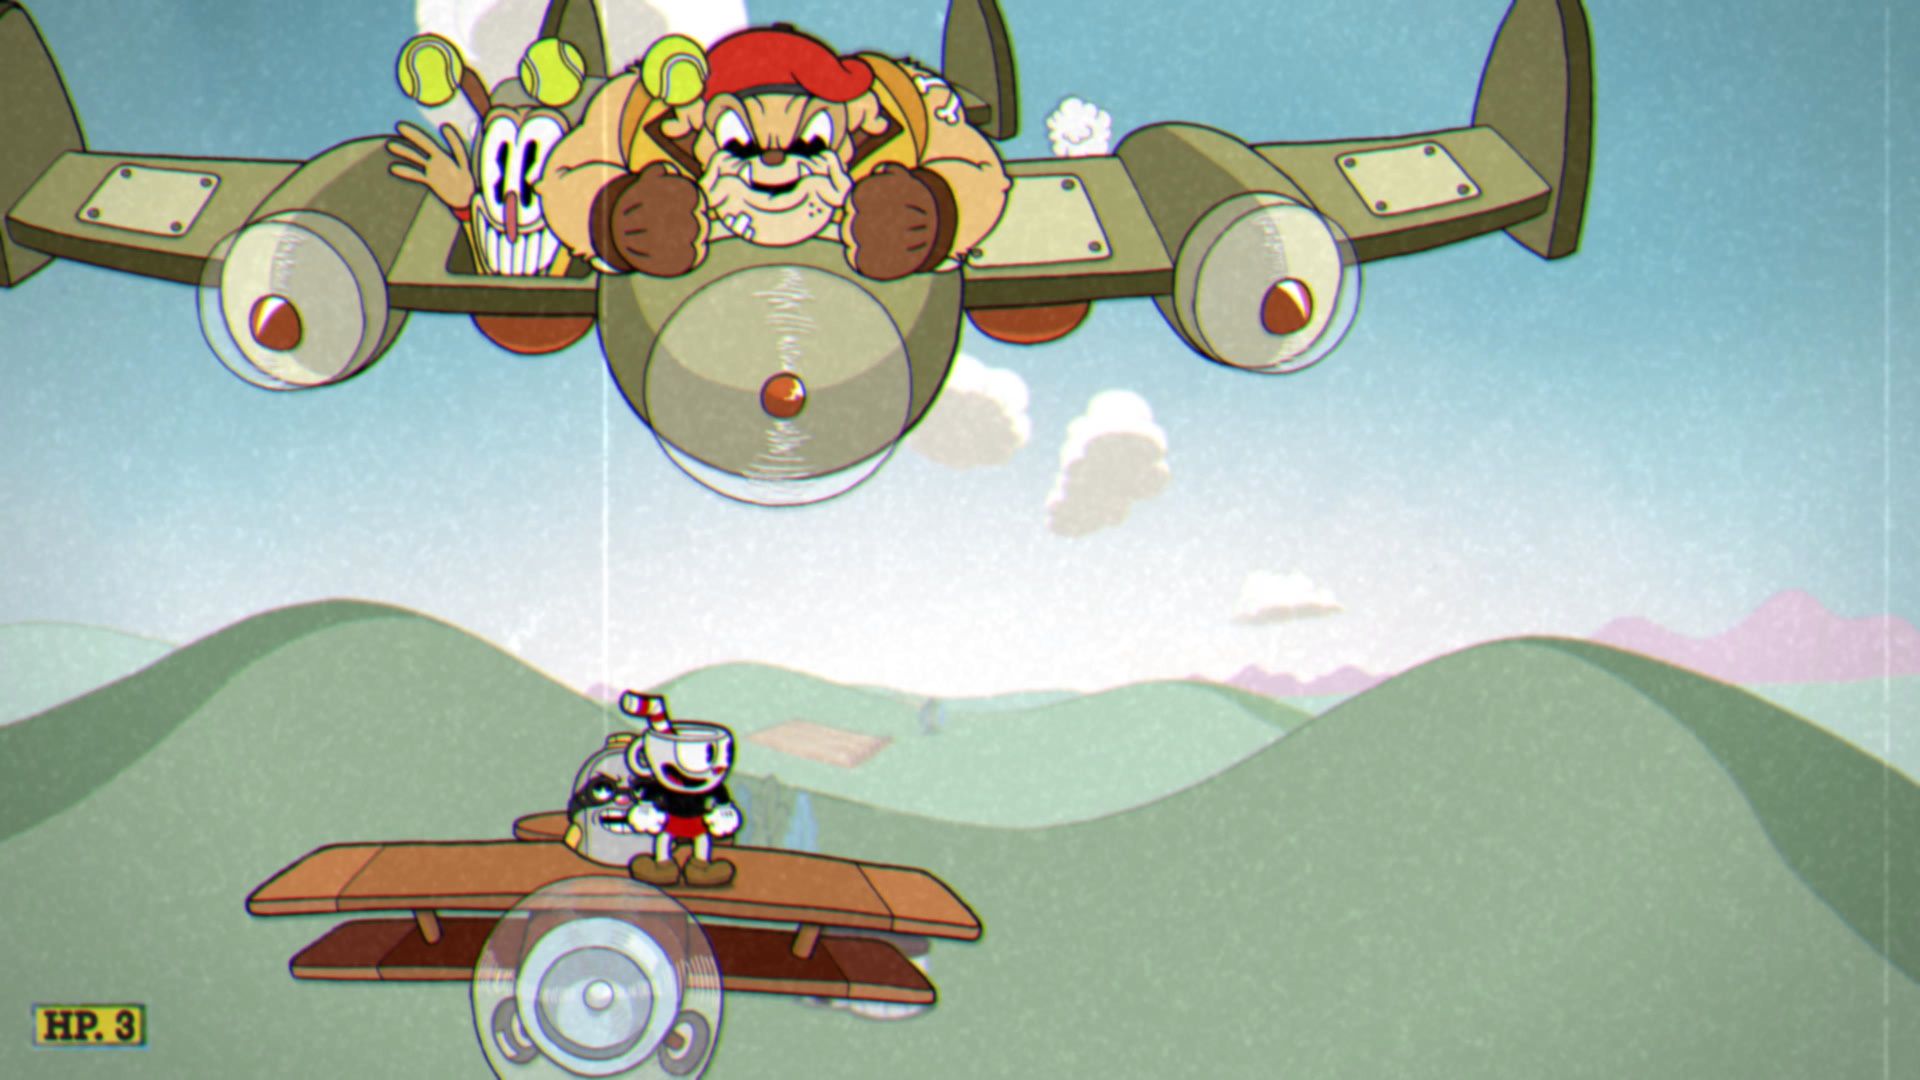 Cuphead The Delicious Course, The Howling Aces, Phase 1, Tennis ball attack large